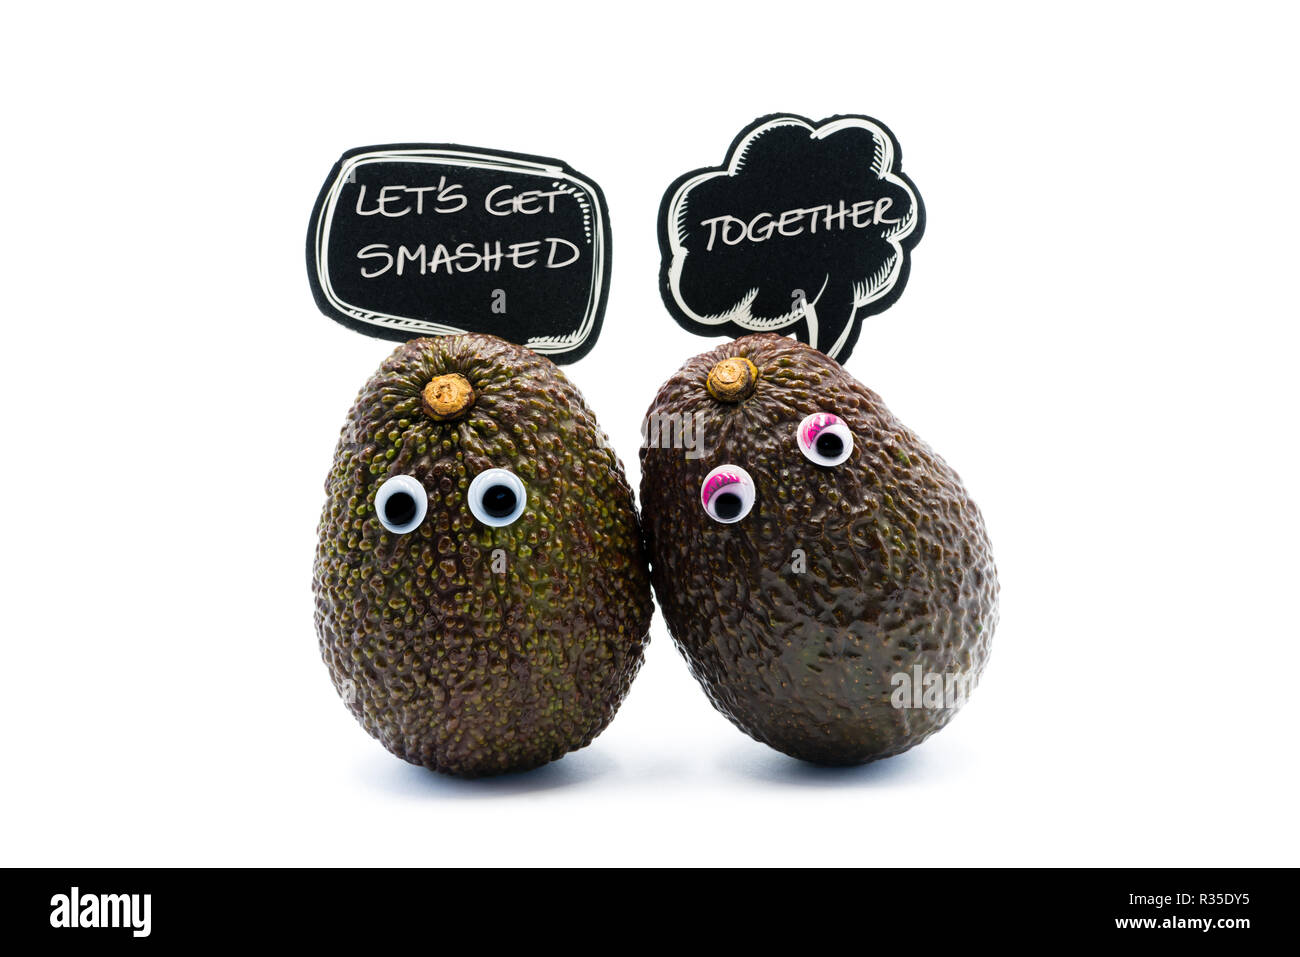 https://c8.alamy.com/comp/R35DY5/romantic-avocados-couple-with-googly-eyes-and-speech-bubble-as-man-and-woman-funny-food-concept-for-creative-projects-R35DY5.jpg